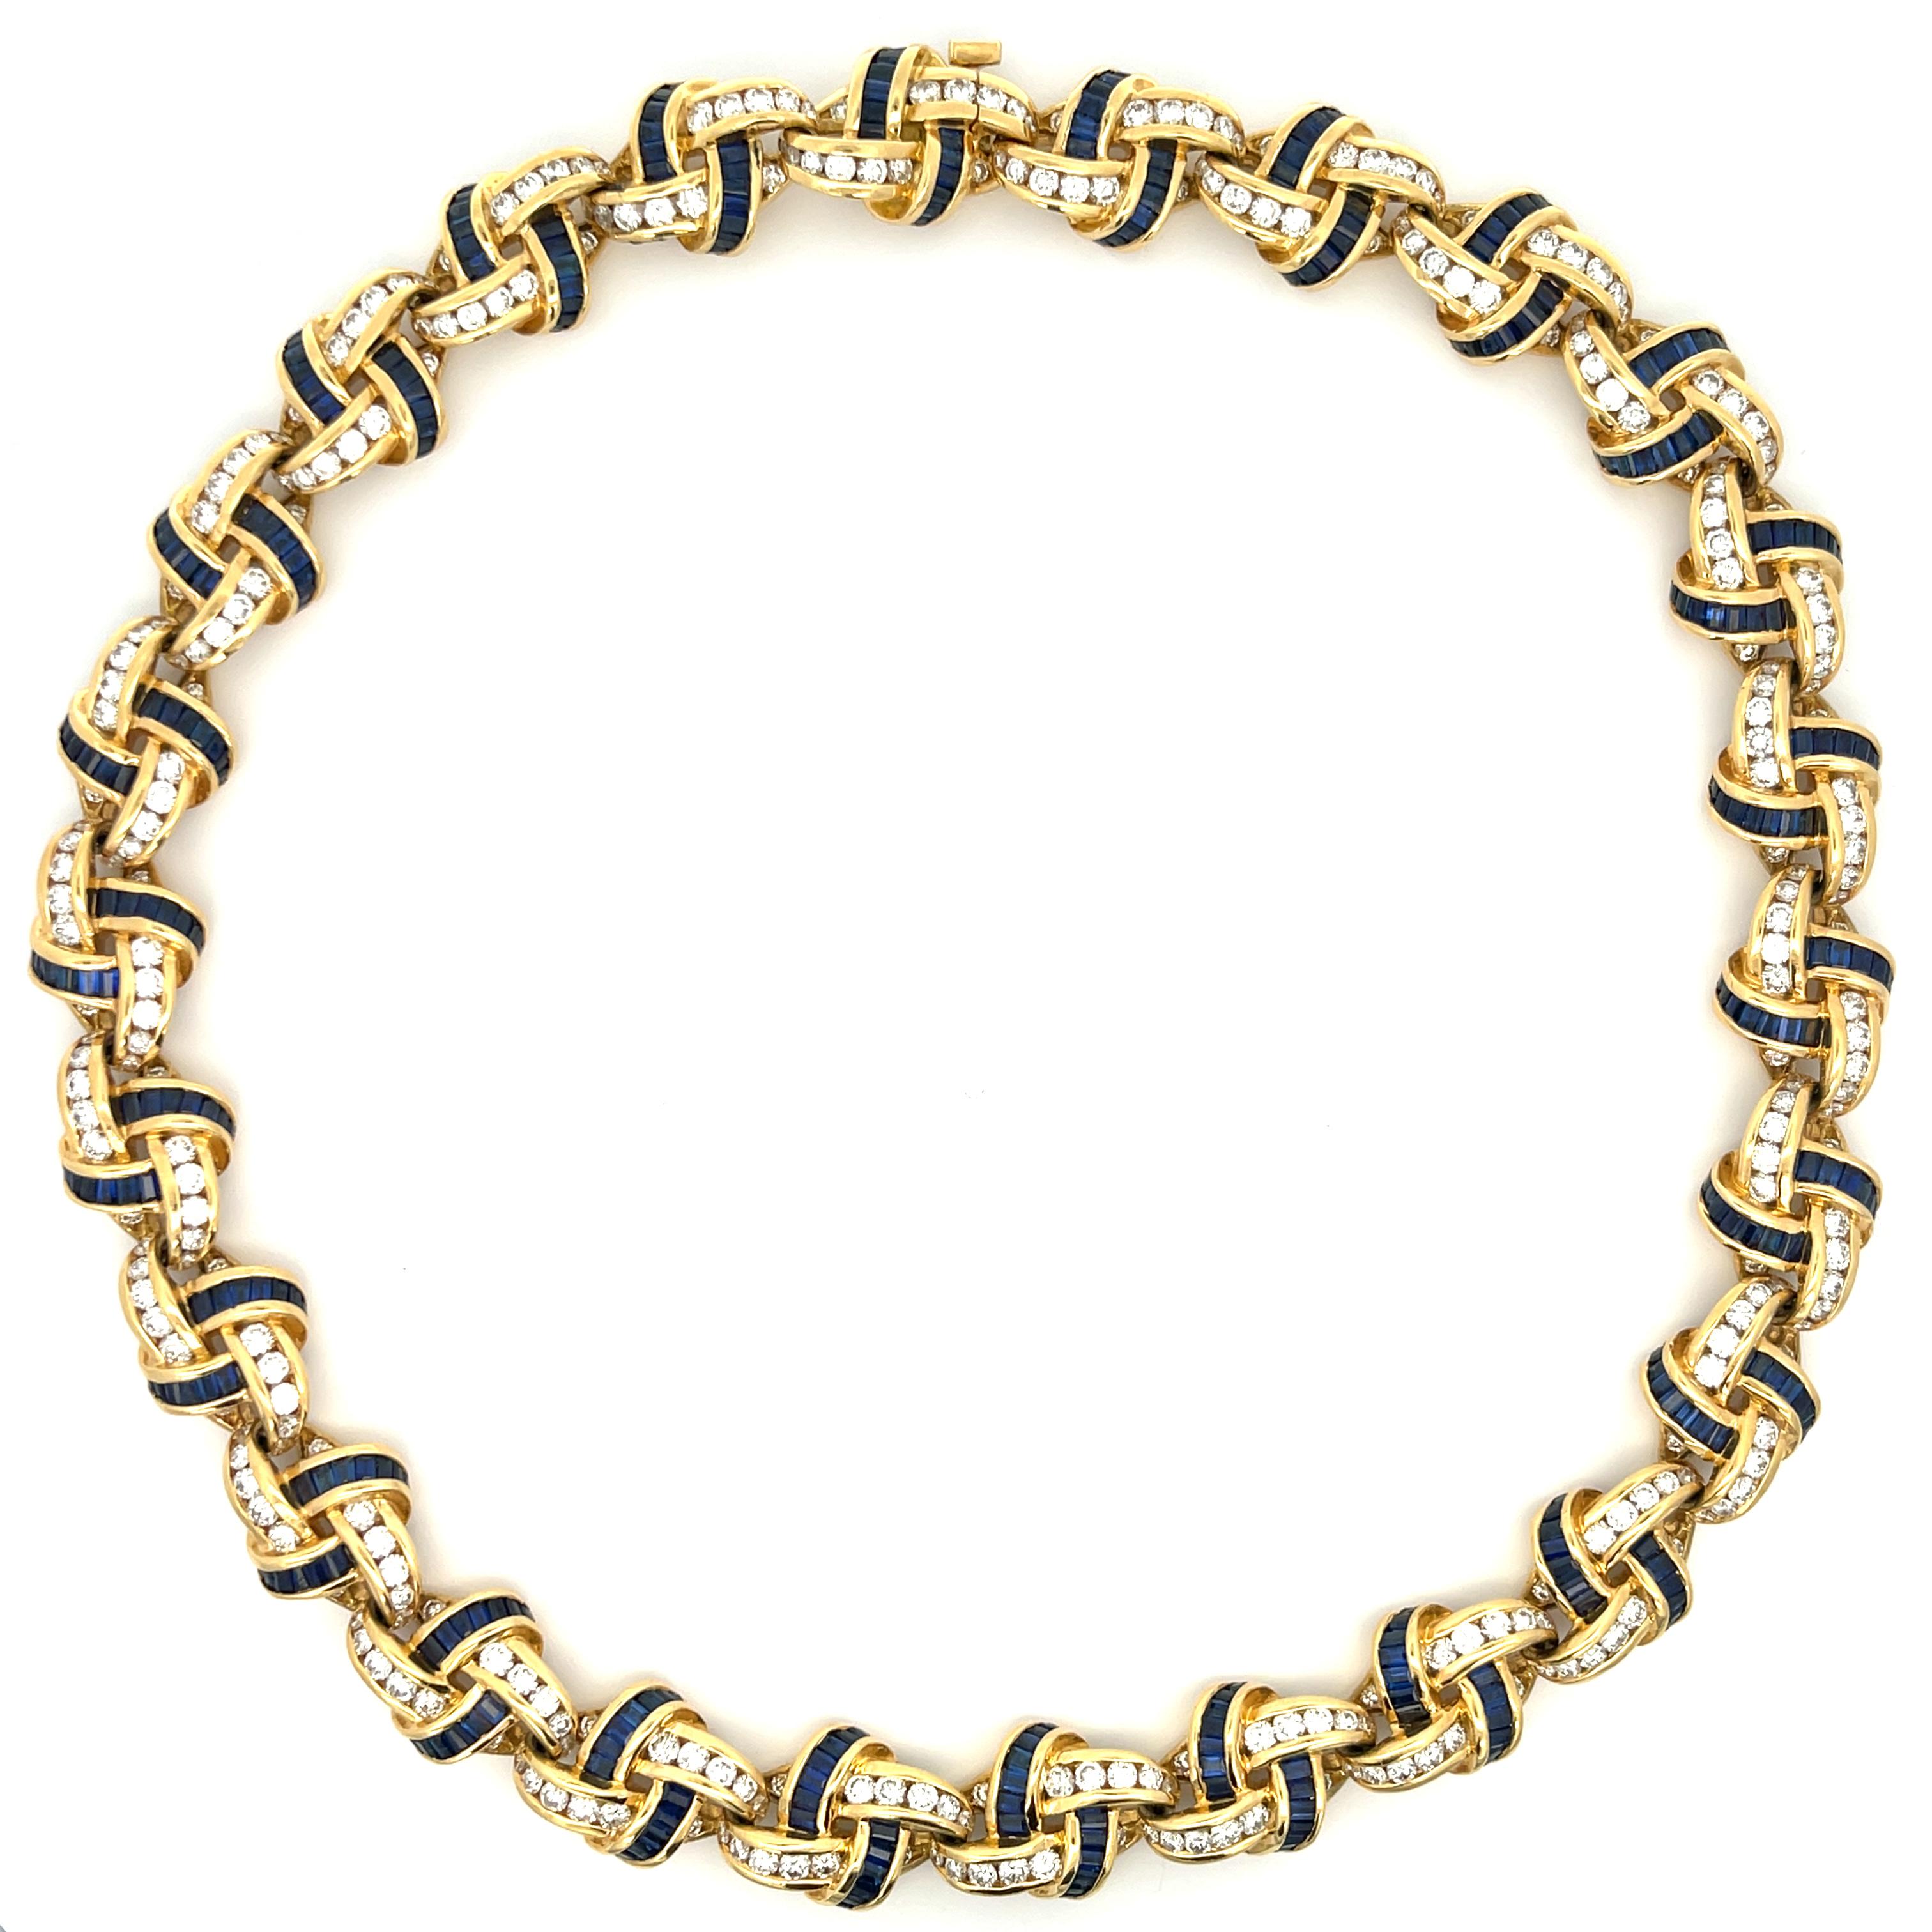 Brilliant Cut Charles Krypell Yellow Gold Sapphire Diamond Necklace